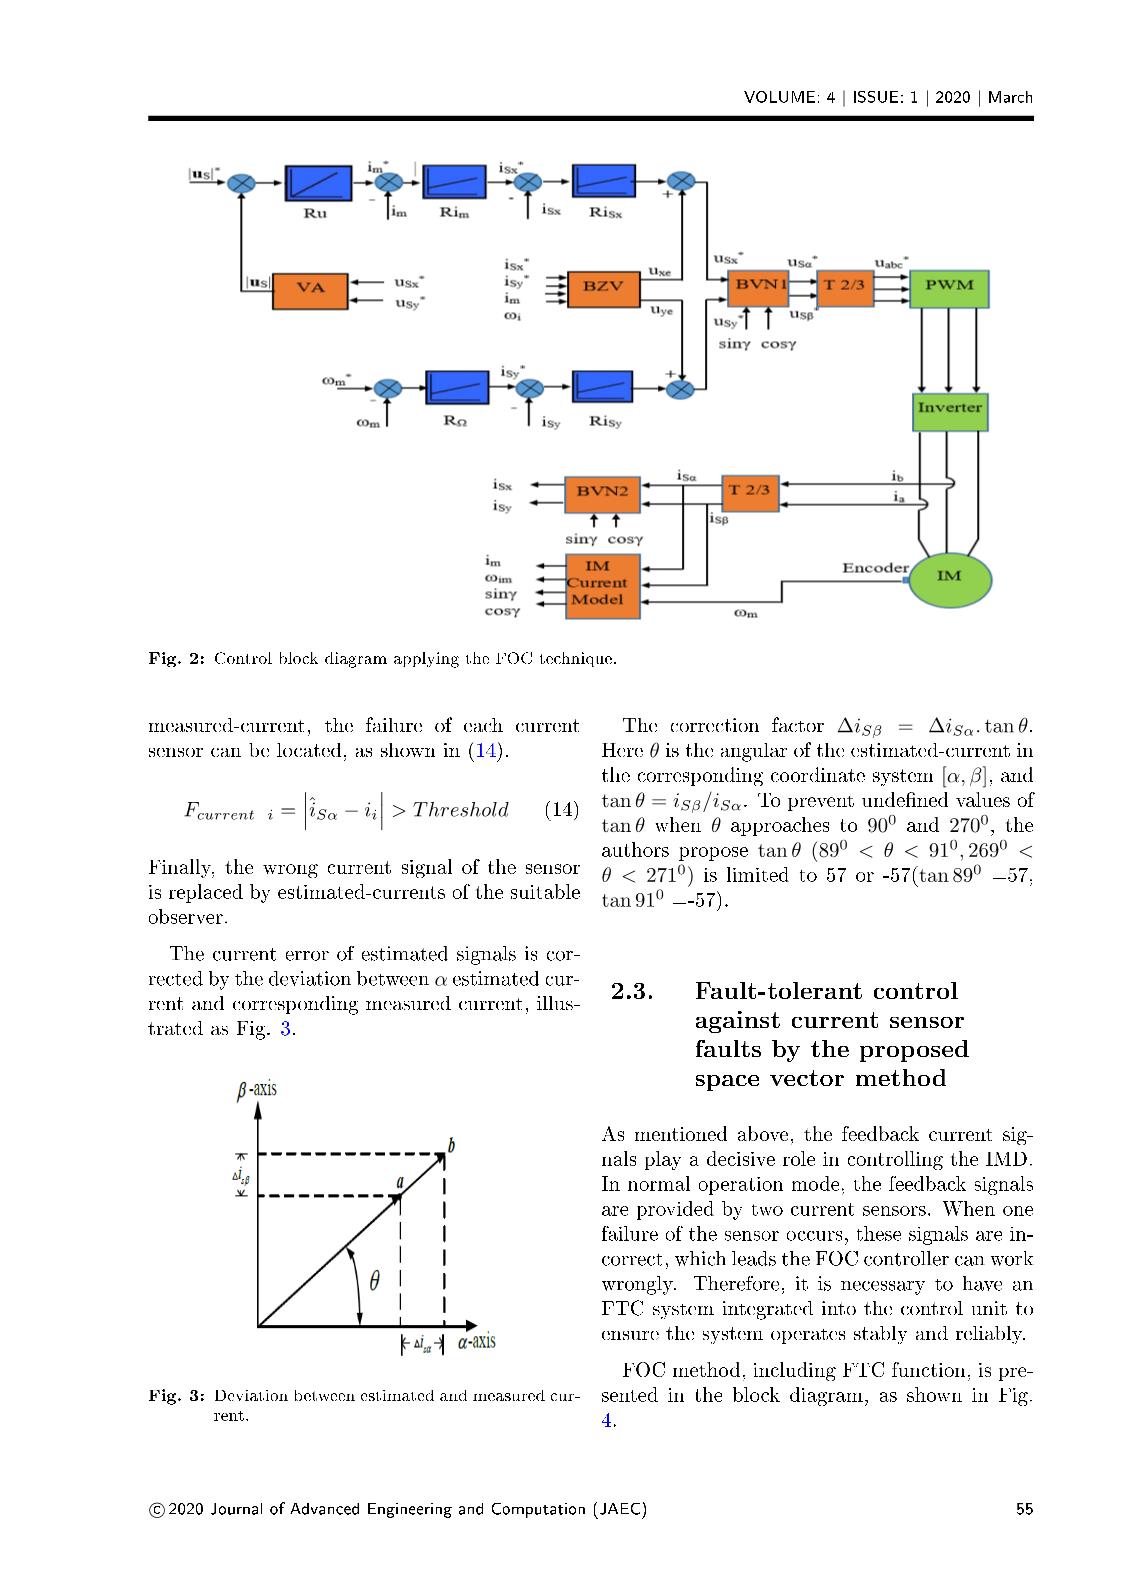 An enhanced fault tolerant control against current sensor failures in induction motor drive by applying space vector trang 5